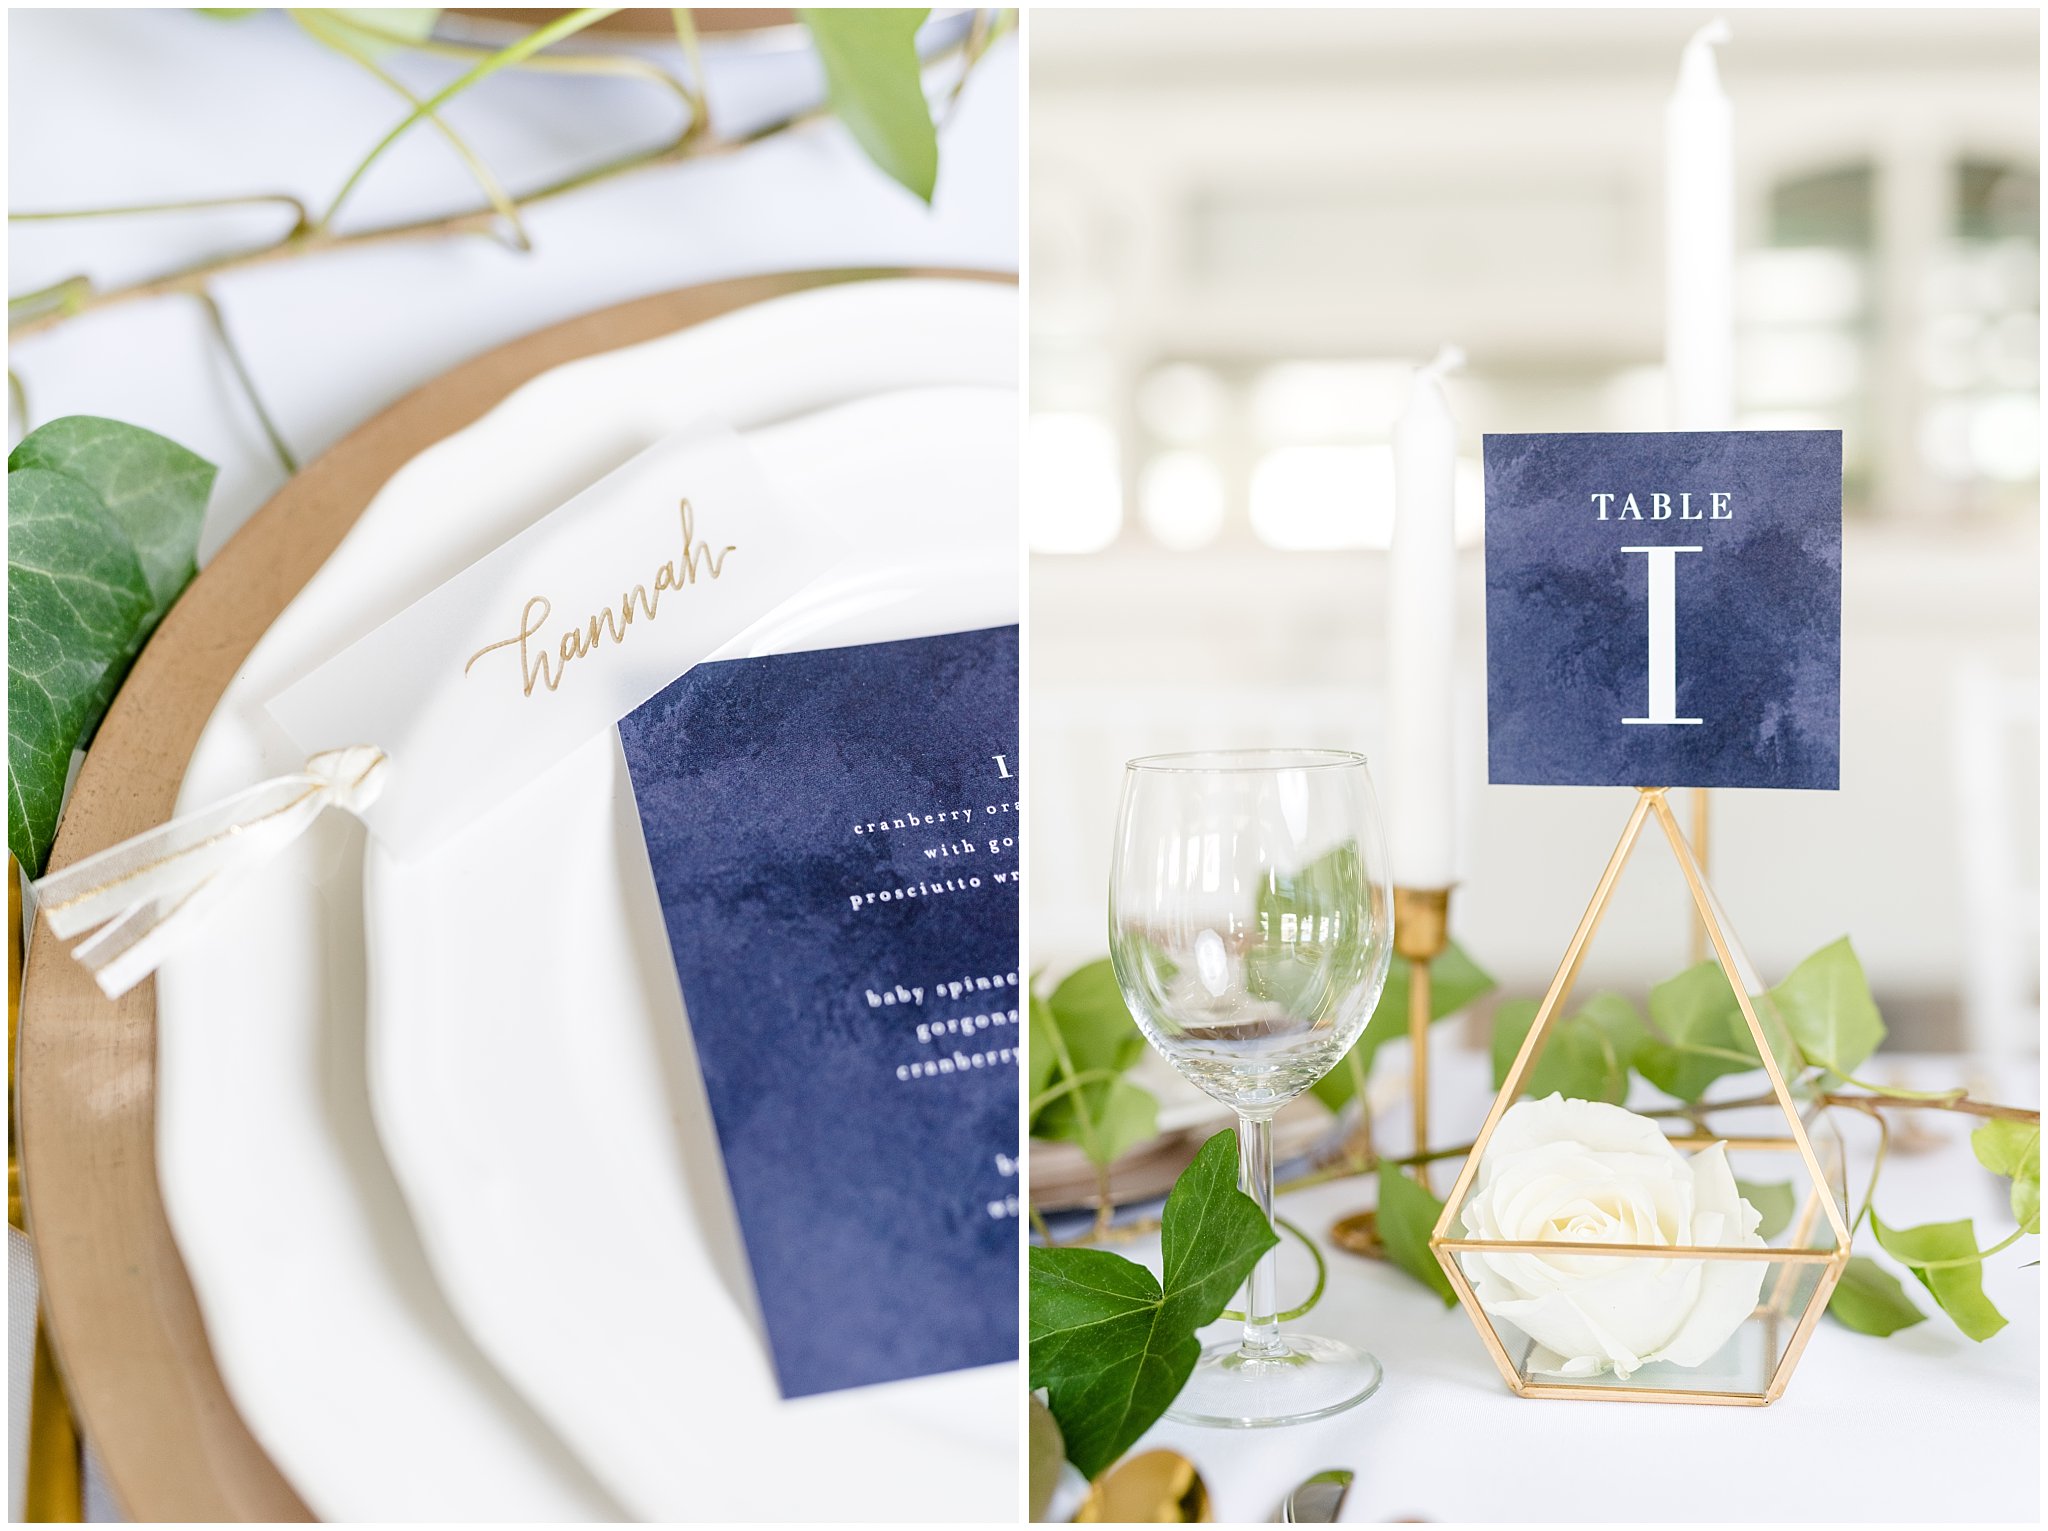 Table setting with table setting cards and table sign | gold, navy and white wedding | Talia Event Center